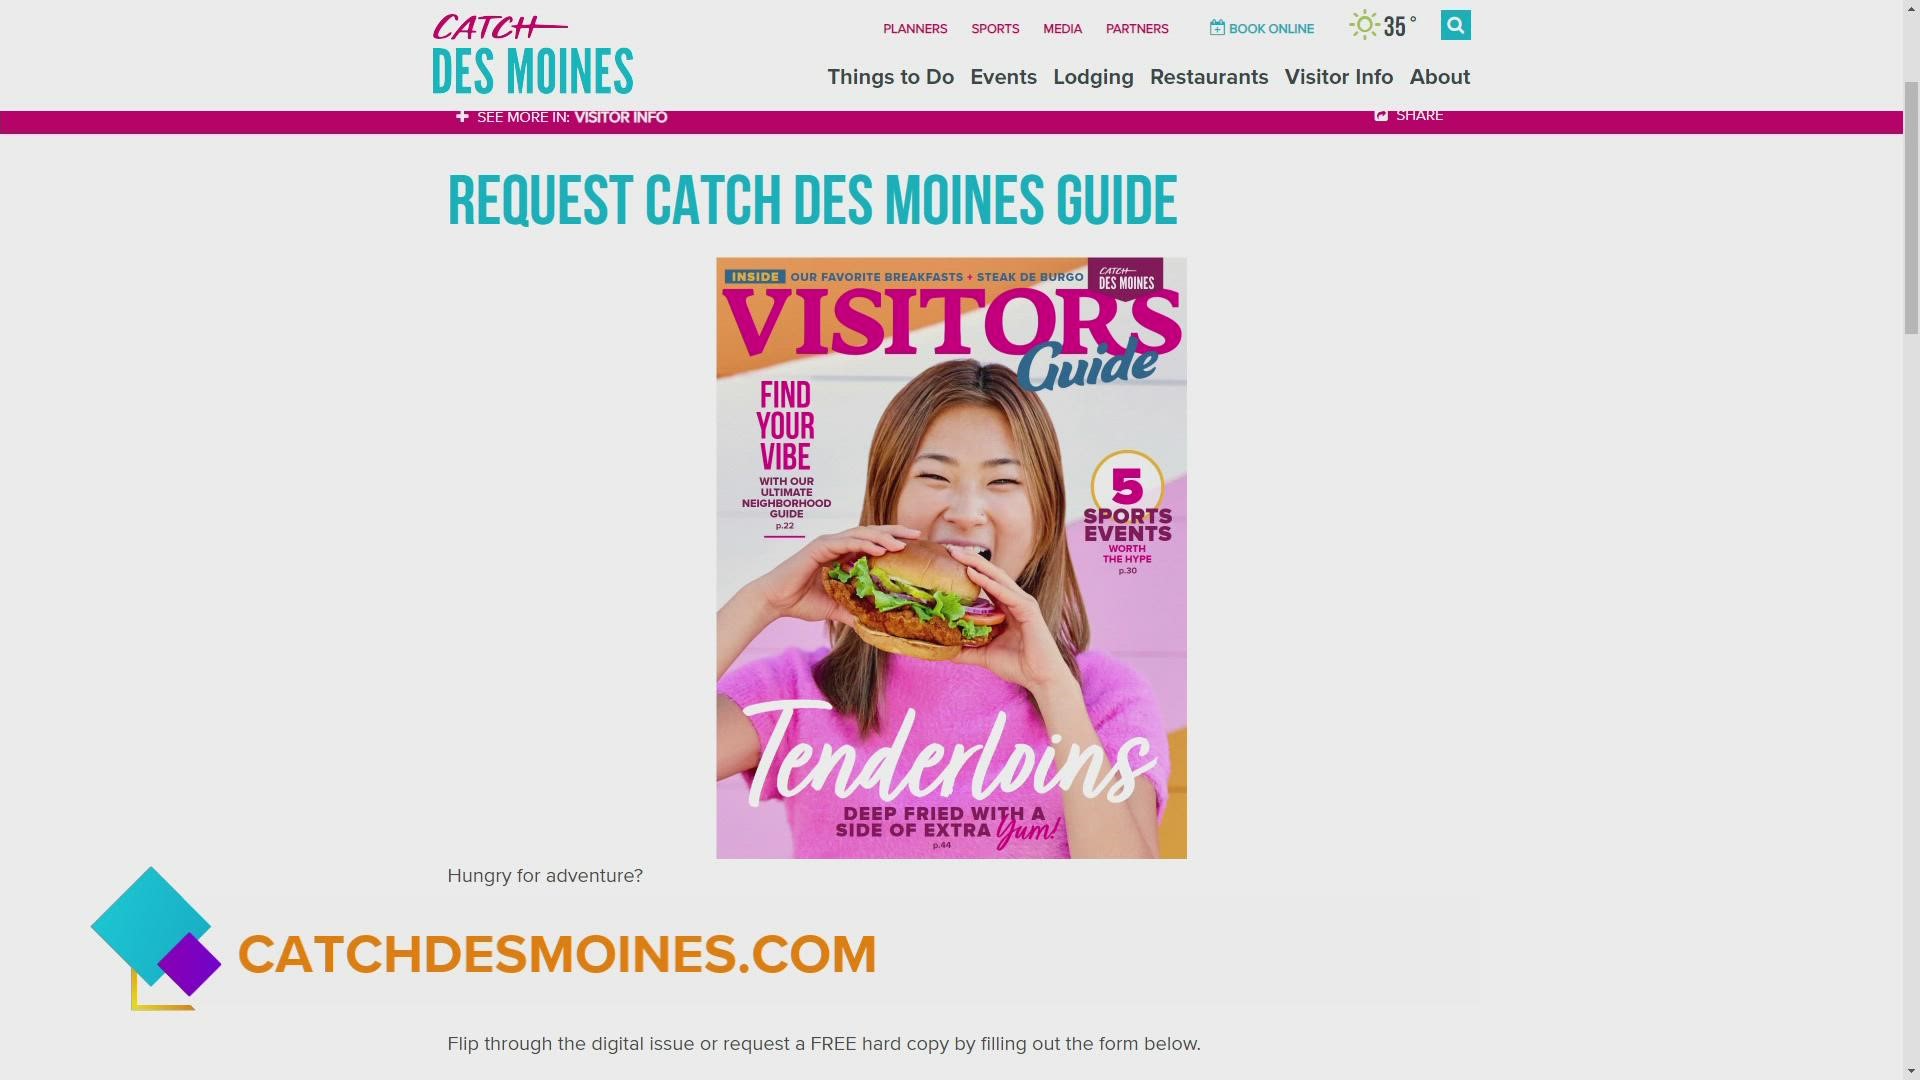 Greg Edwards, President/CEO of Catch Des Moines talks about some of the GREAT EVENTS in town this week AND the BRAND NEW Visitors Guide that is now available.